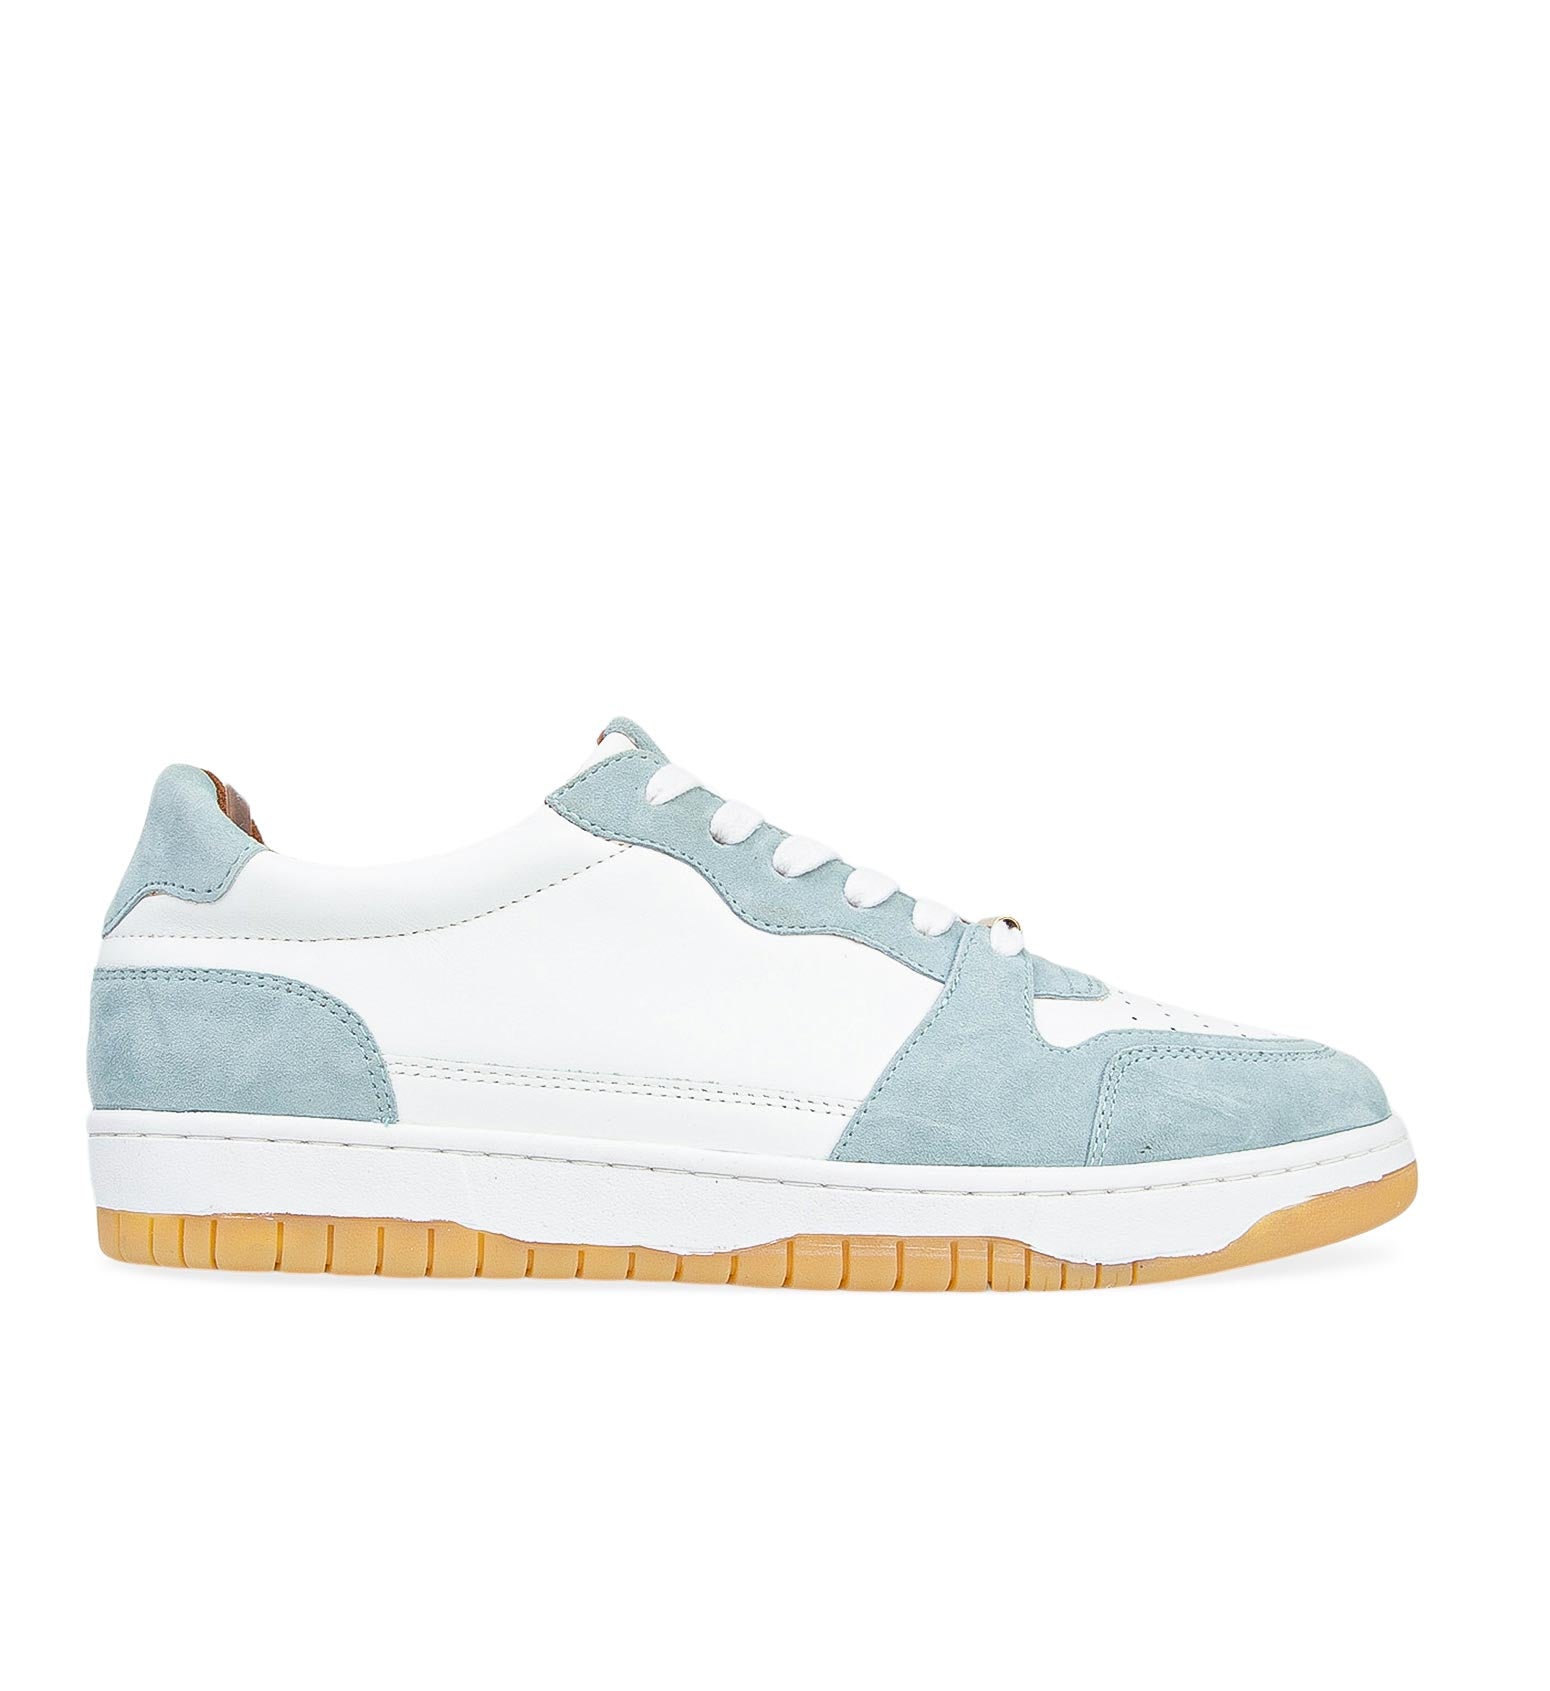 Tui White Leather & Blue Suede Sneakers | Bared Footwear